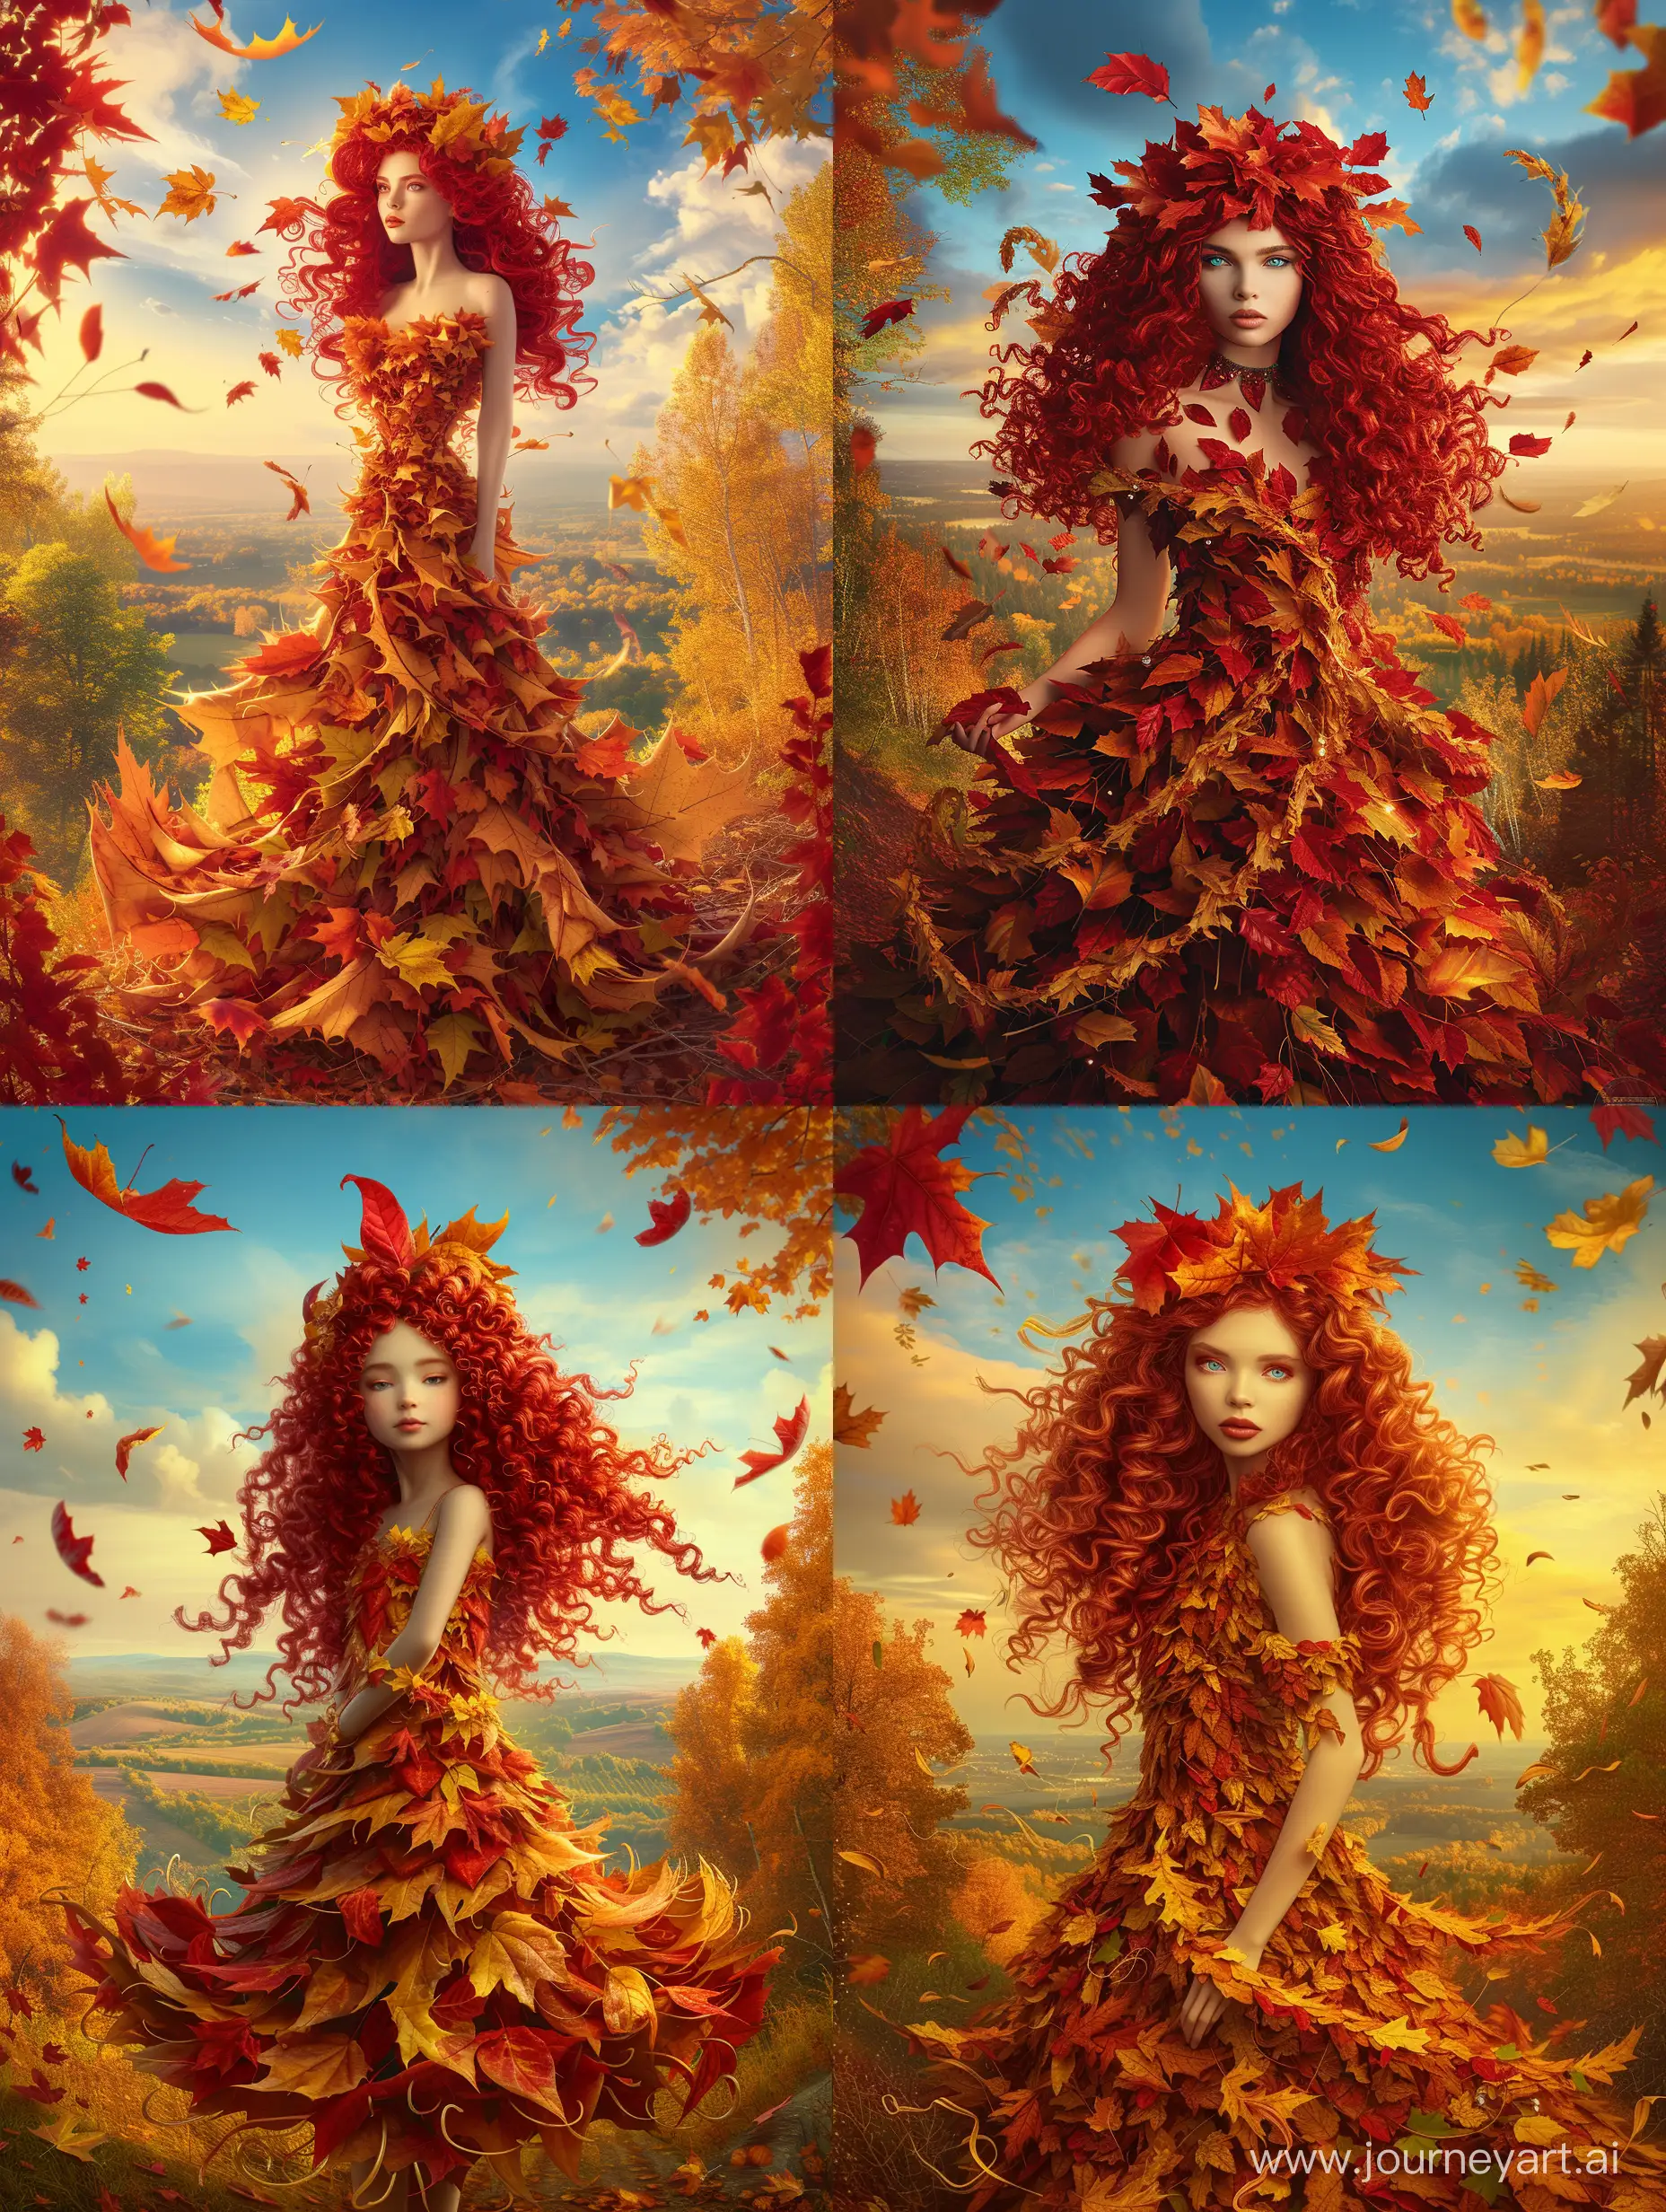 Autumn-Queen-with-Red-Curly-Hair-and-Leaf-Dress-in-Forest-Landscape